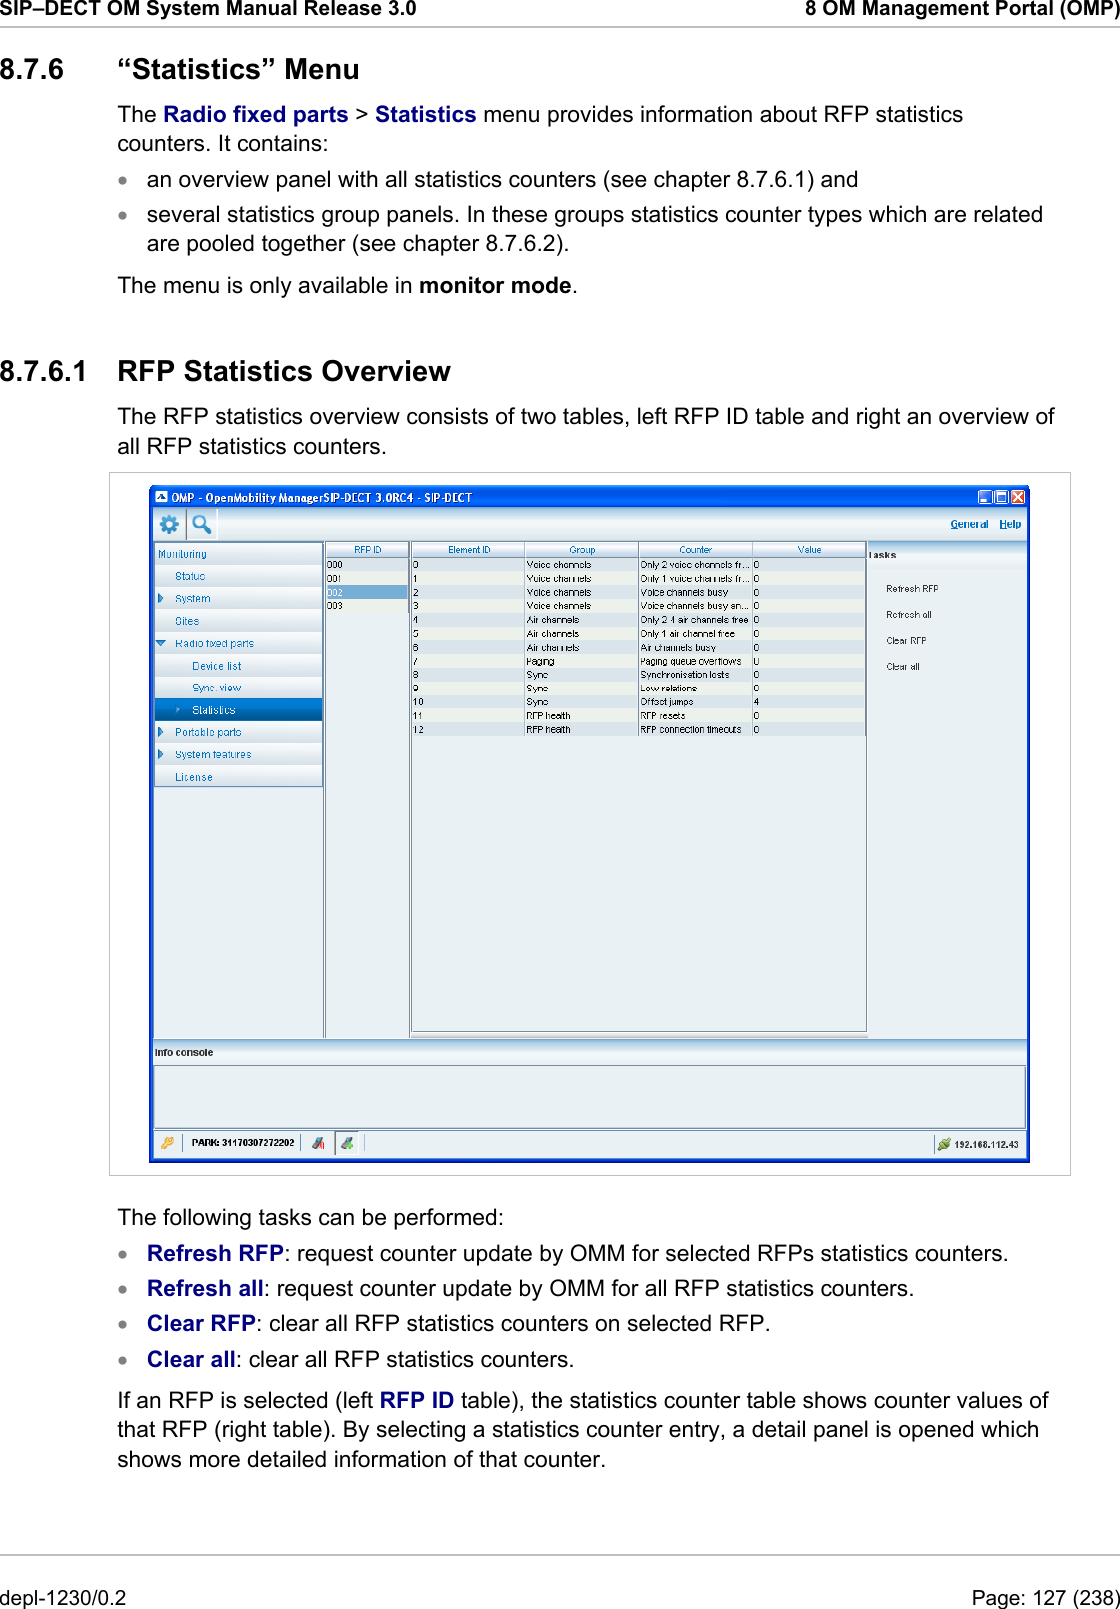 SIP–DECT OM System Manual Release 3.0  8 OM Management Portal (OMP) 8.7.6 “Statistics” Menu The Radio fixed parts &gt; Statistics menu provides information about RFP statistics counters. It contains: an overview panel with all statistics counters (see chapter 8.7.6.1) and  • •  several statistics group panels. In these groups statistics counter types which are related are pooled together (see chapter 8.7.6.2). The menu is only available in monitor mode. 8.7.6.1  RFP Statistics Overview The RFP statistics overview consists of two tables, left RFP ID table and right an overview of all RFP statistics counters.   The following tasks can be performed: Refresh RFP: request counter update by OMM for selected RFPs statistics counters. • • • • Refresh all: request counter update by OMM for all RFP statistics counters. Clear RFP: clear all RFP statistics counters on selected RFP. Clear all: clear all RFP statistics counters. If an RFP is selected (left RFP ID table), the statistics counter table shows counter values of that RFP (right table). By selecting a statistics counter entry, a detail panel is opened which shows more detailed information of that counter. depl-1230/0.2  Page: 127 (238) 